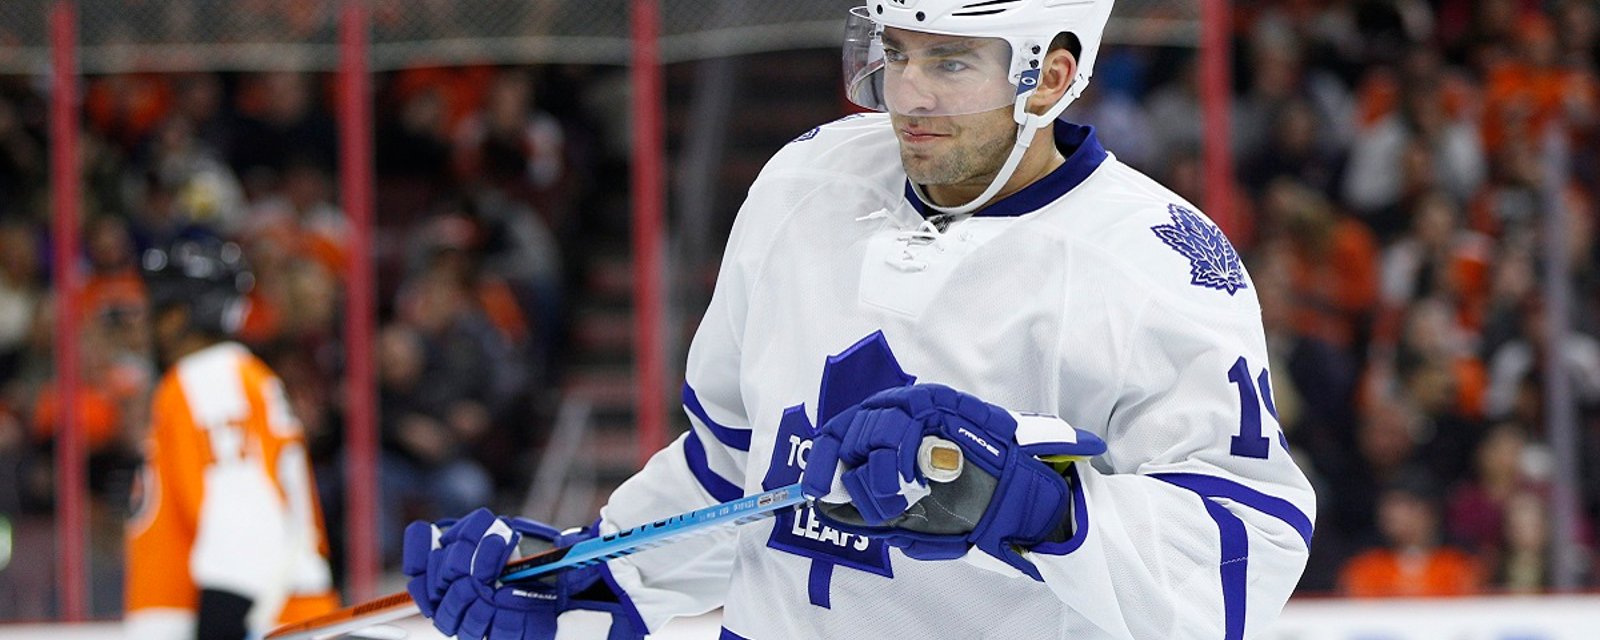 Report: Joffrey Lupul admits he will not start the season with the Maple Leafs.